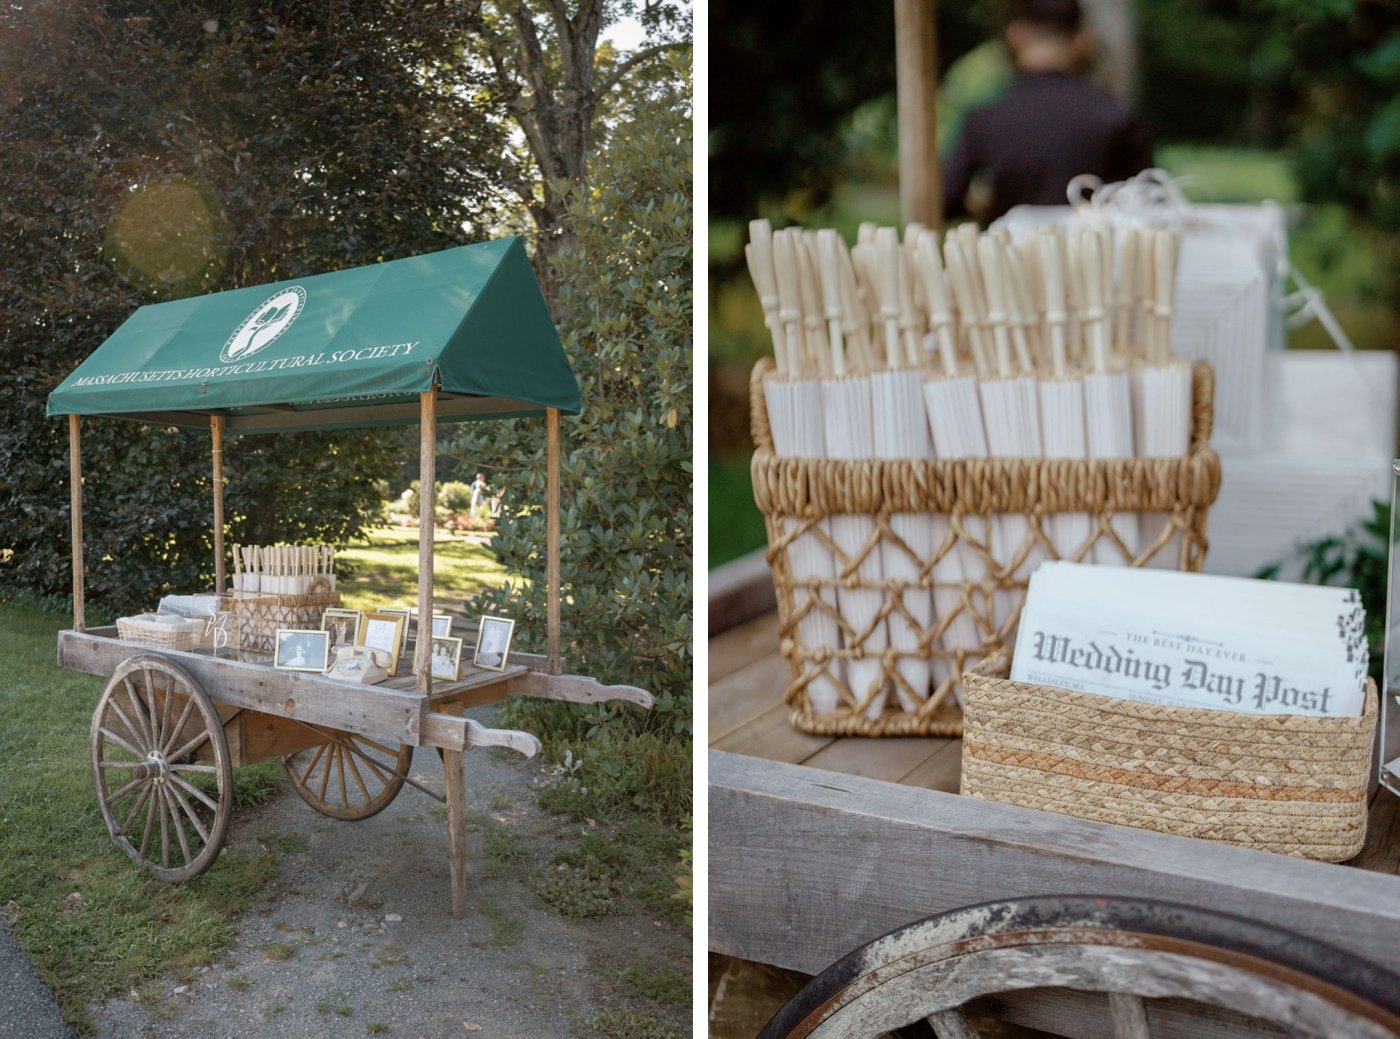 Baskets filled with paper parasols and custom newspaper programs at a Massachusetts wedding ceremony